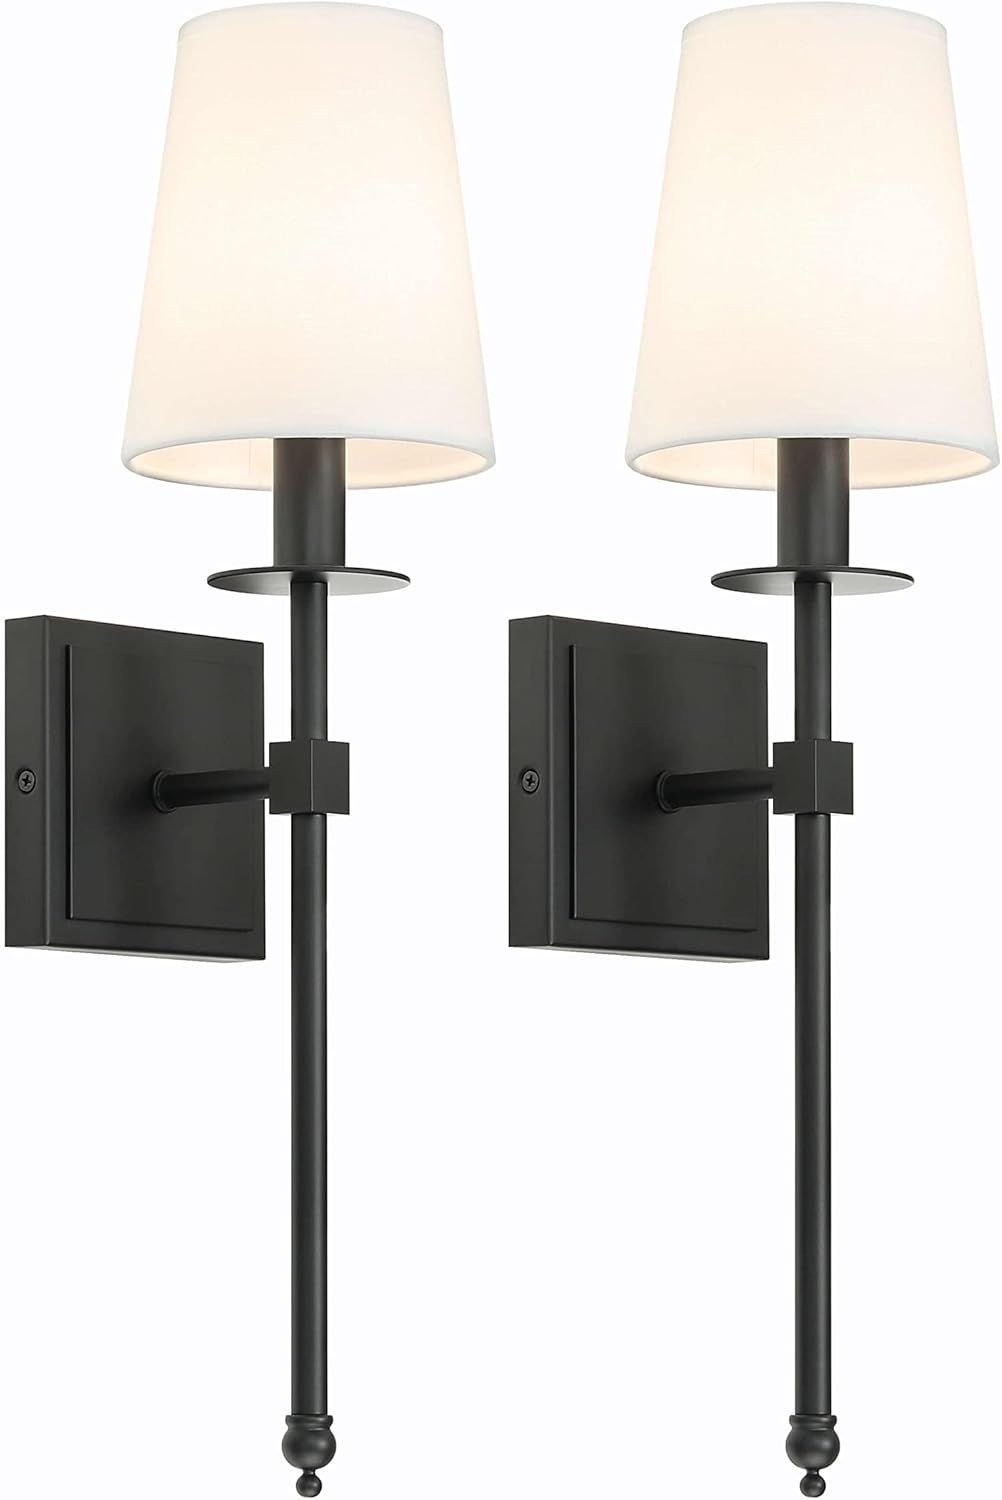 XiNBEi Lighting Black Wall Sconces Set of 2? Classic Sconces Wall Lighting with Flared White Fabr... | Amazon (US)